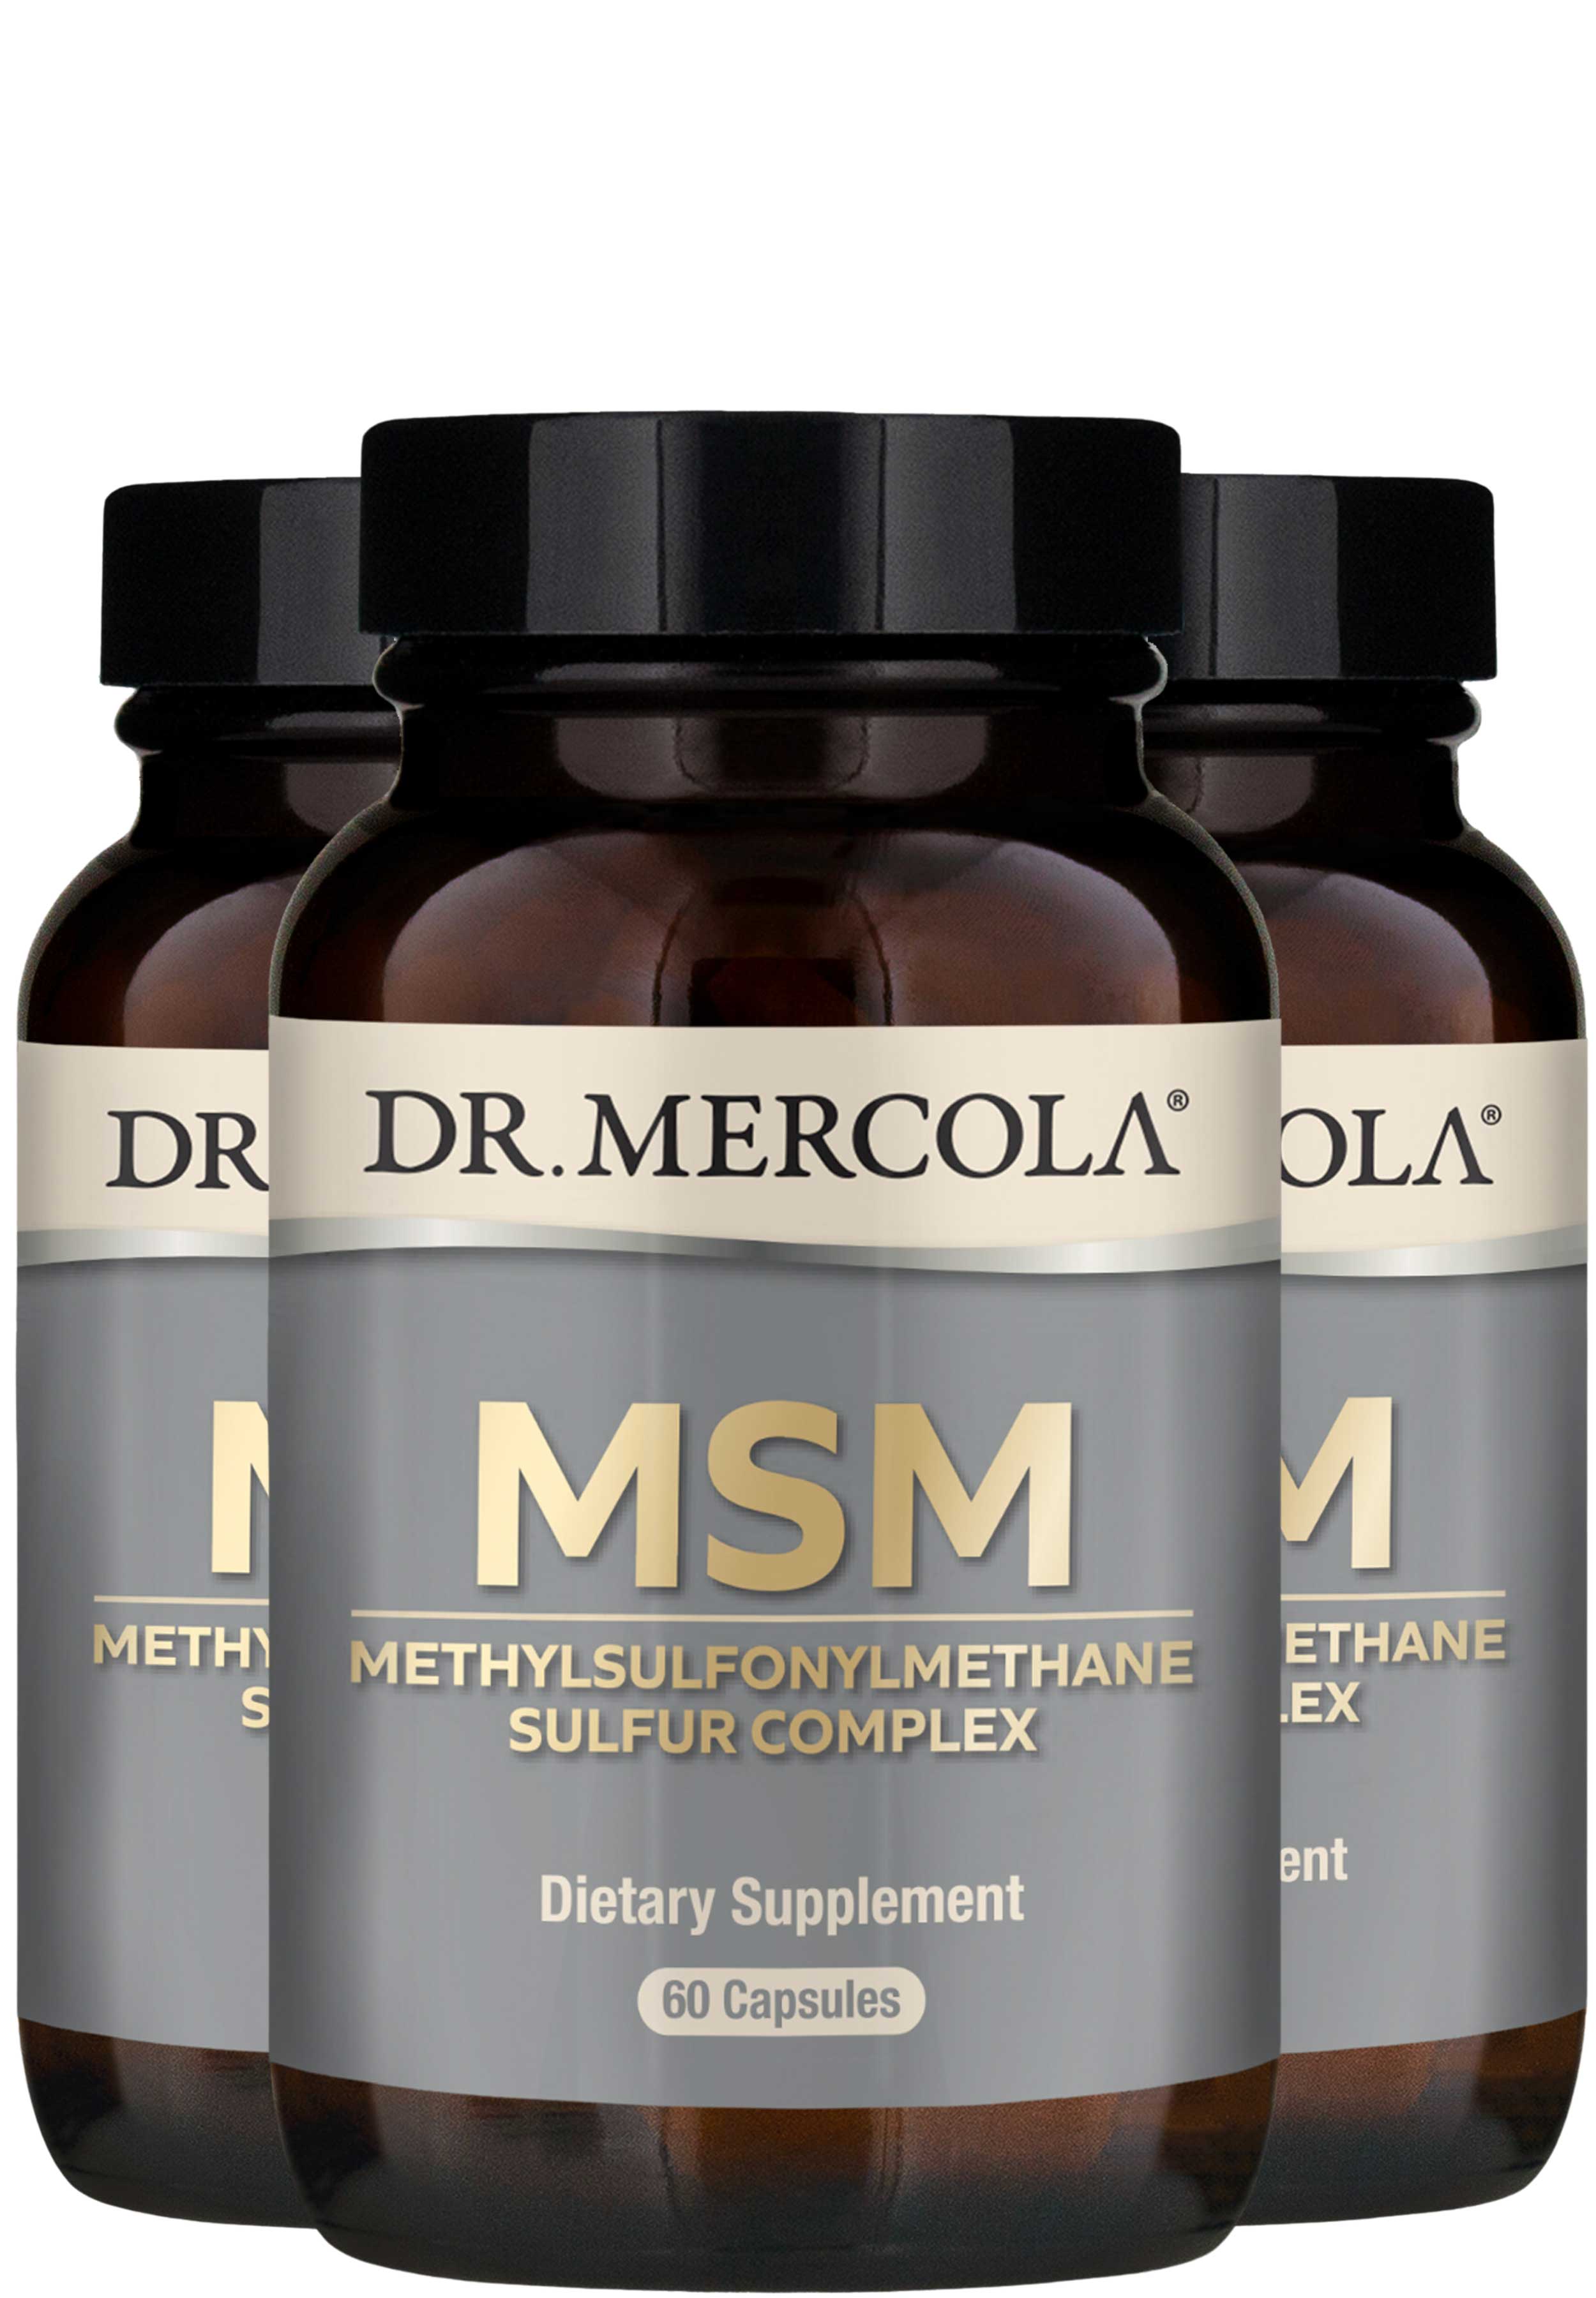 Dr. Mercola MSM with Organic Sulfur Complex